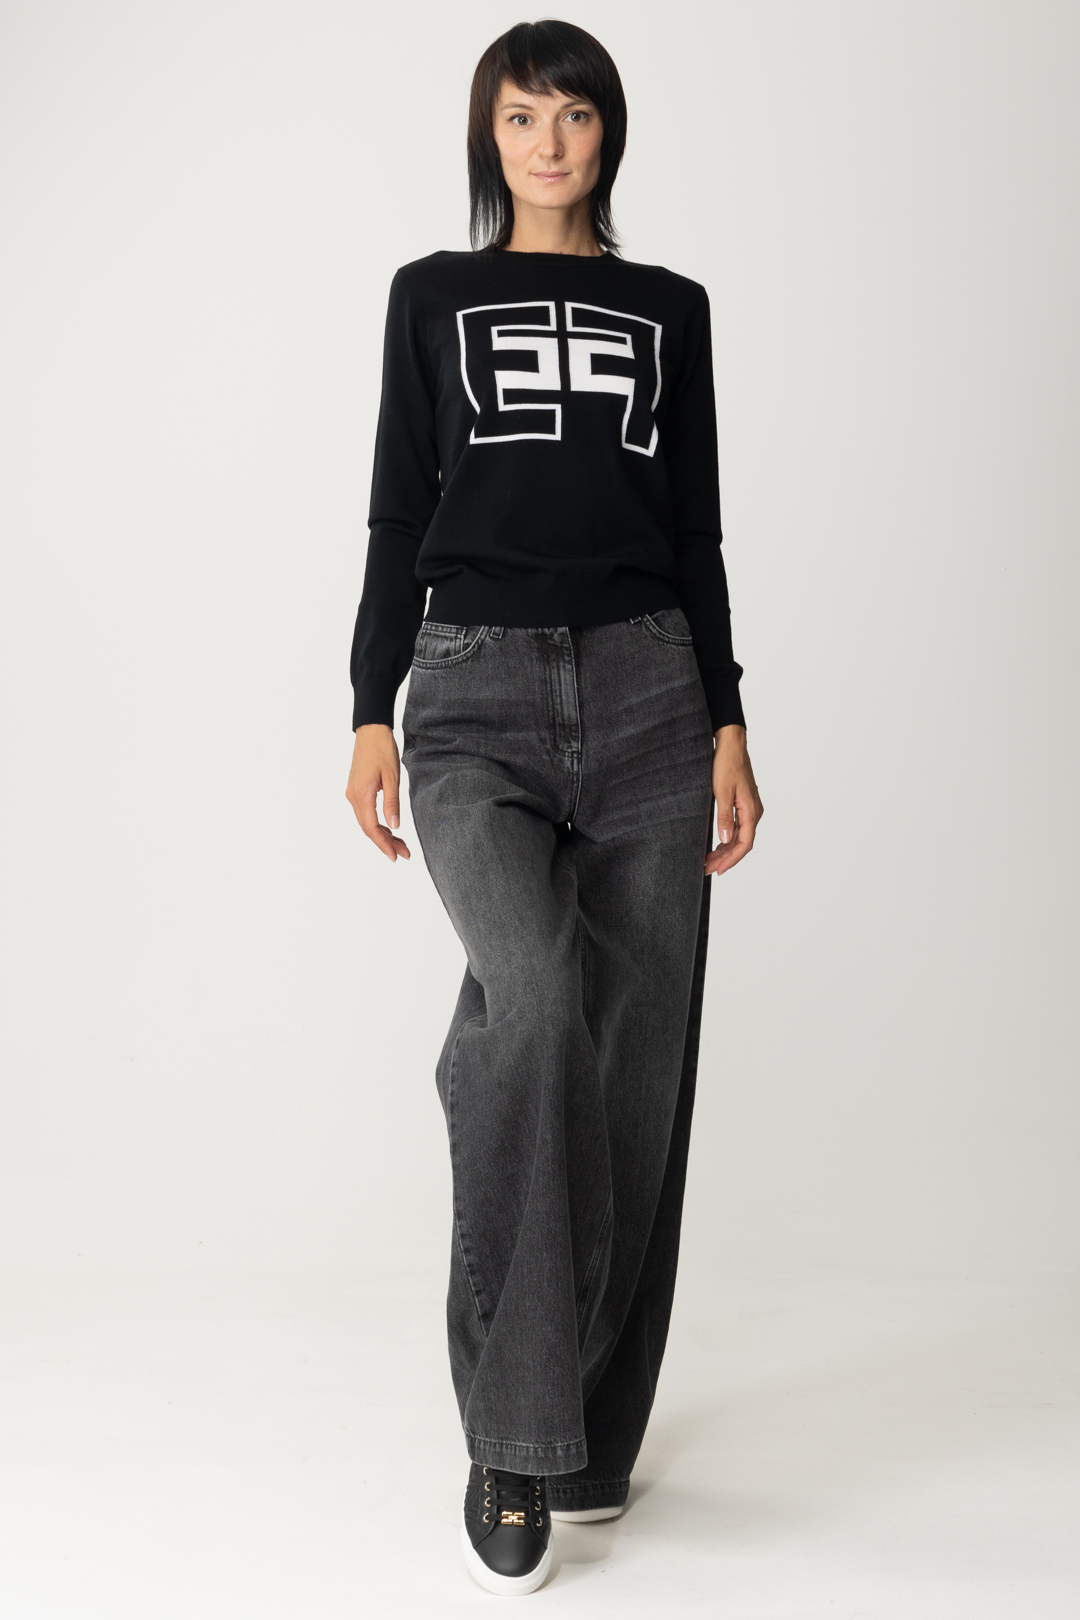 Preview: Elisabetta Franchi Knit pullover with contrasting logo Nero/Burro